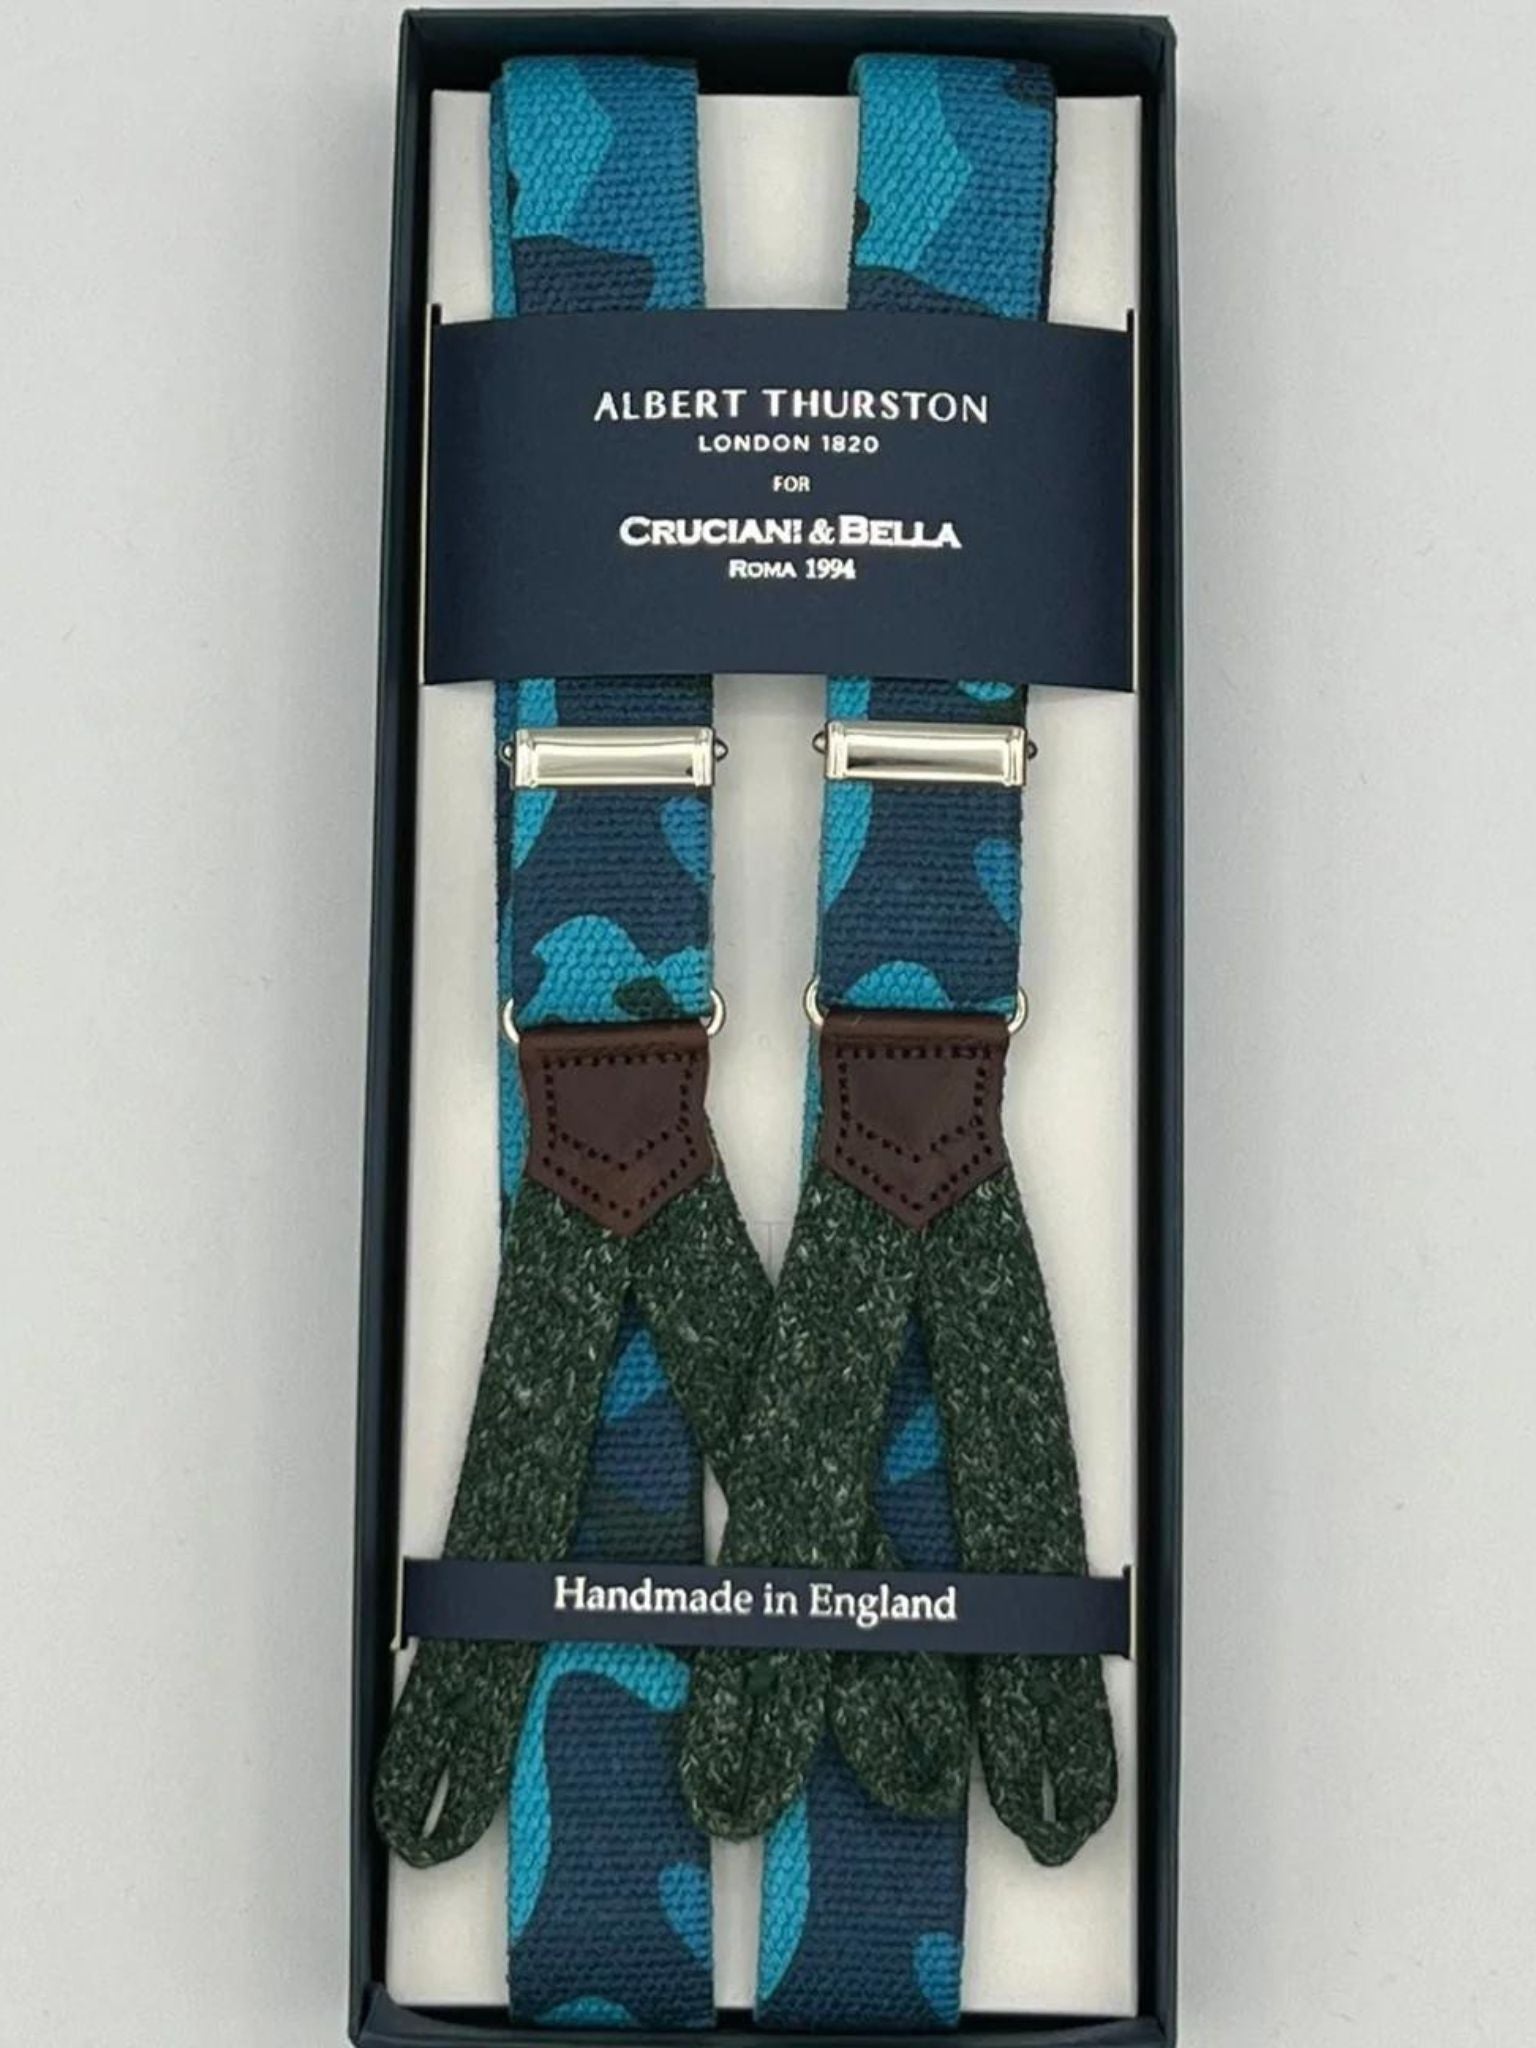 Albert Thurston for Cruciani & Bella Made in England Adjustable Sizing 25 mm elastic braces Blue, Azure  Military Motif Braid ends Y-Shaped Nickel  Fittings Size: L